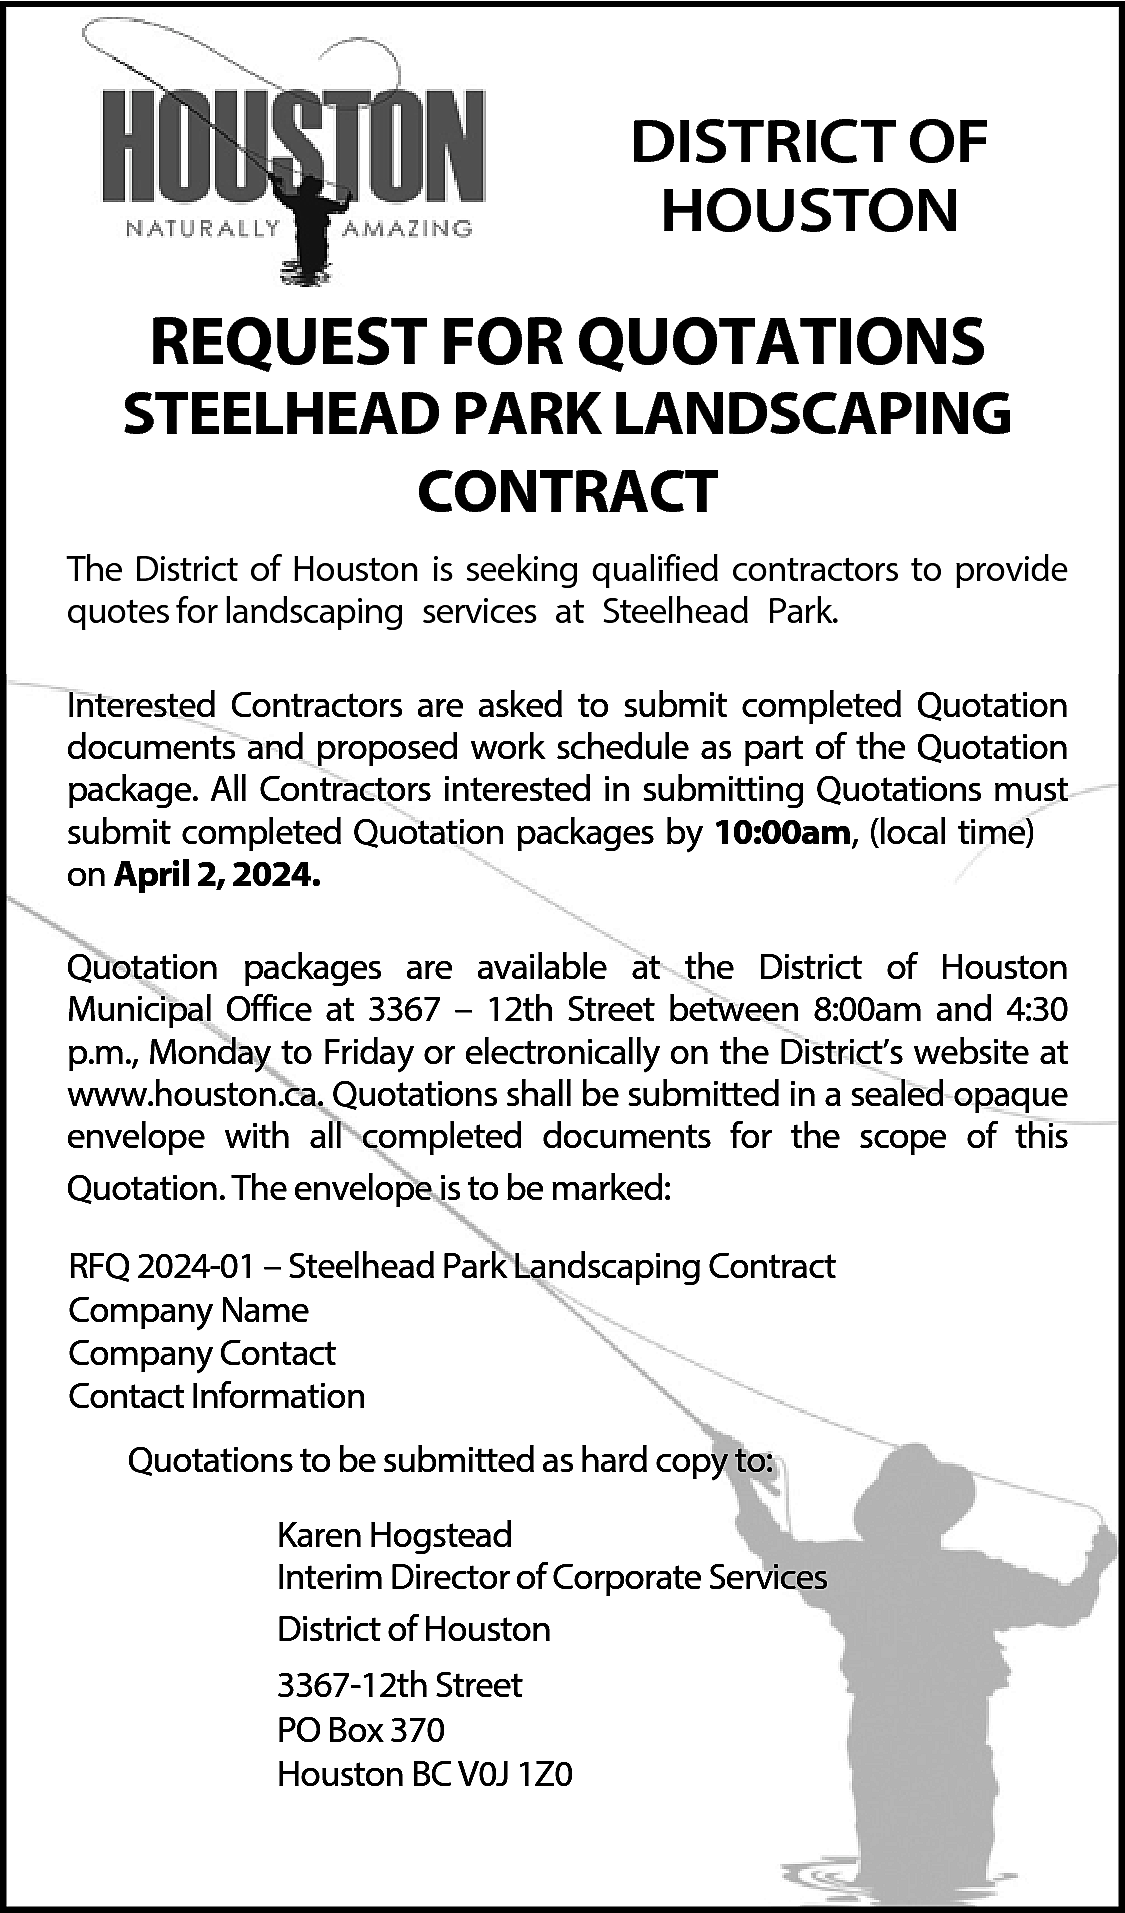 DISTRICT OF <br>HOUSTON <br> <br>REQUEST  DISTRICT OF  HOUSTON    REQUEST FOR QUOTATIONS    STEELHEAD PARK LANDSCAPING  CONTRACT  The District of Houston is seeking qualified contractors to provide  quotes for landscaping services at Steelhead Park.  Interested Contractors are asked to submit completed Quotation  documents and proposed work schedule as part of the Quotation  package. All Contractors interested in submitting Quotations must  submit completed Quotation packages by 10:00am, (local time)  on April 2, 2024.  Quotation packages are available at the District of Houston  Municipal Office at 3367 – 12th Street between 8:00am and 4:30  p.m., Monday to Friday or electronically on the District’s website at  www.houston.ca. Quotations shall be submitted in a sealed opaque  envelope with all completed documents for the scope of this  Quotation. The envelope is to be marked:  RFQ 2024-01 – Steelhead Park Landscaping Contract  Company Name  Company Contact  Contact Information  Quotations to be submitted as hard copy to:  Karen Hogstead  Interim Director of Corporate Services  District of Houston  3367-12th Street  PO Box 370  Houston BC V0J 1Z0    